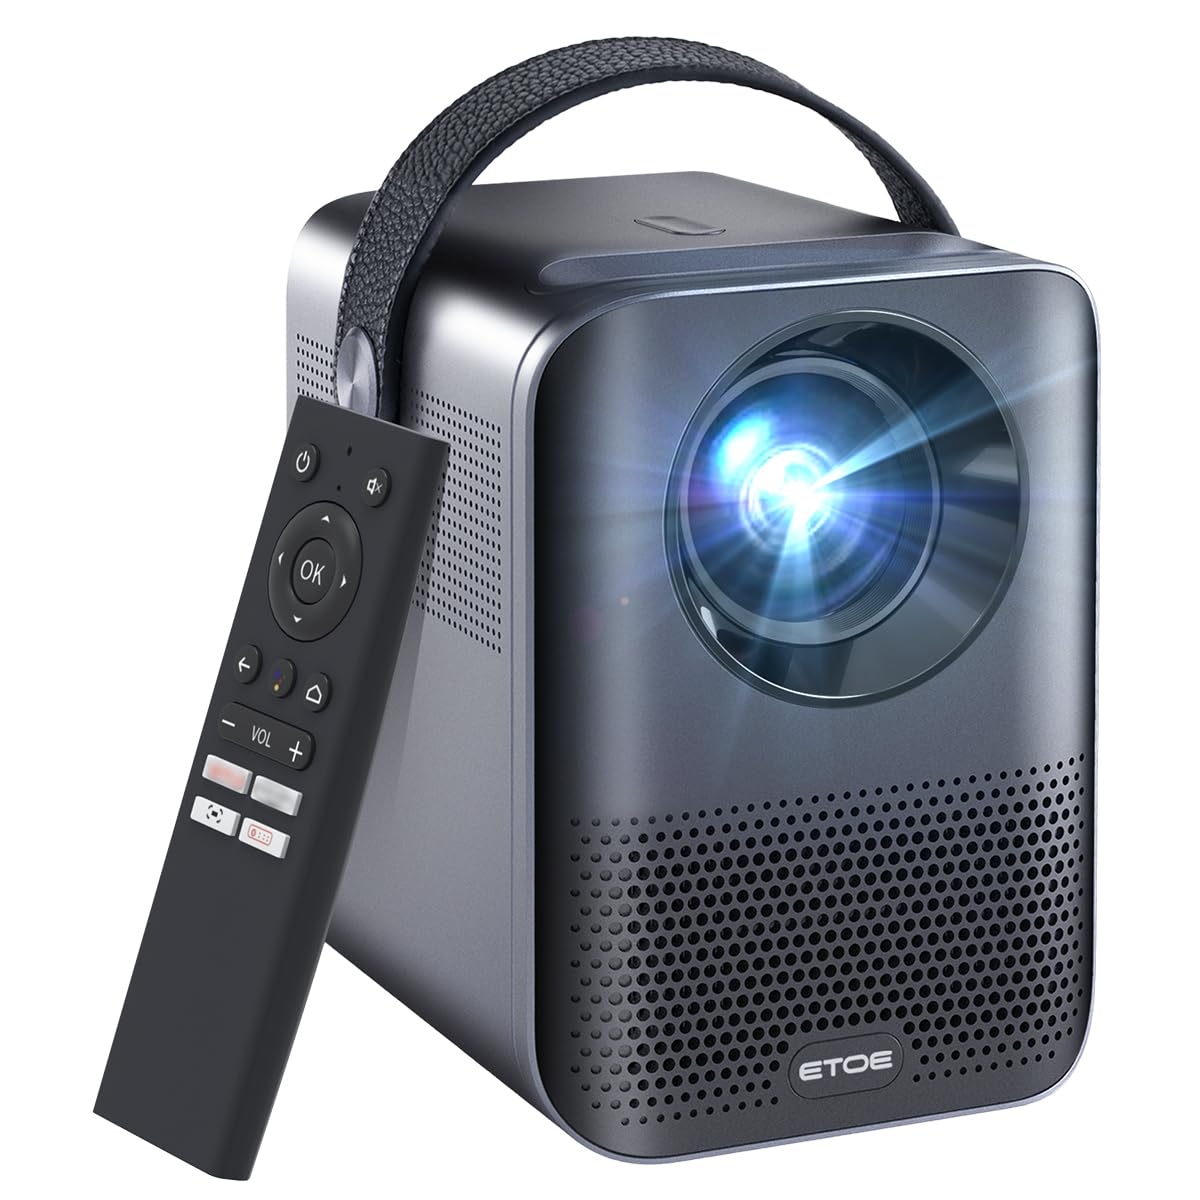 Check the manufacturer's website for any available firmware updates for the projector.
Download and install the latest firmware to see if it resolves the sound playback issue.